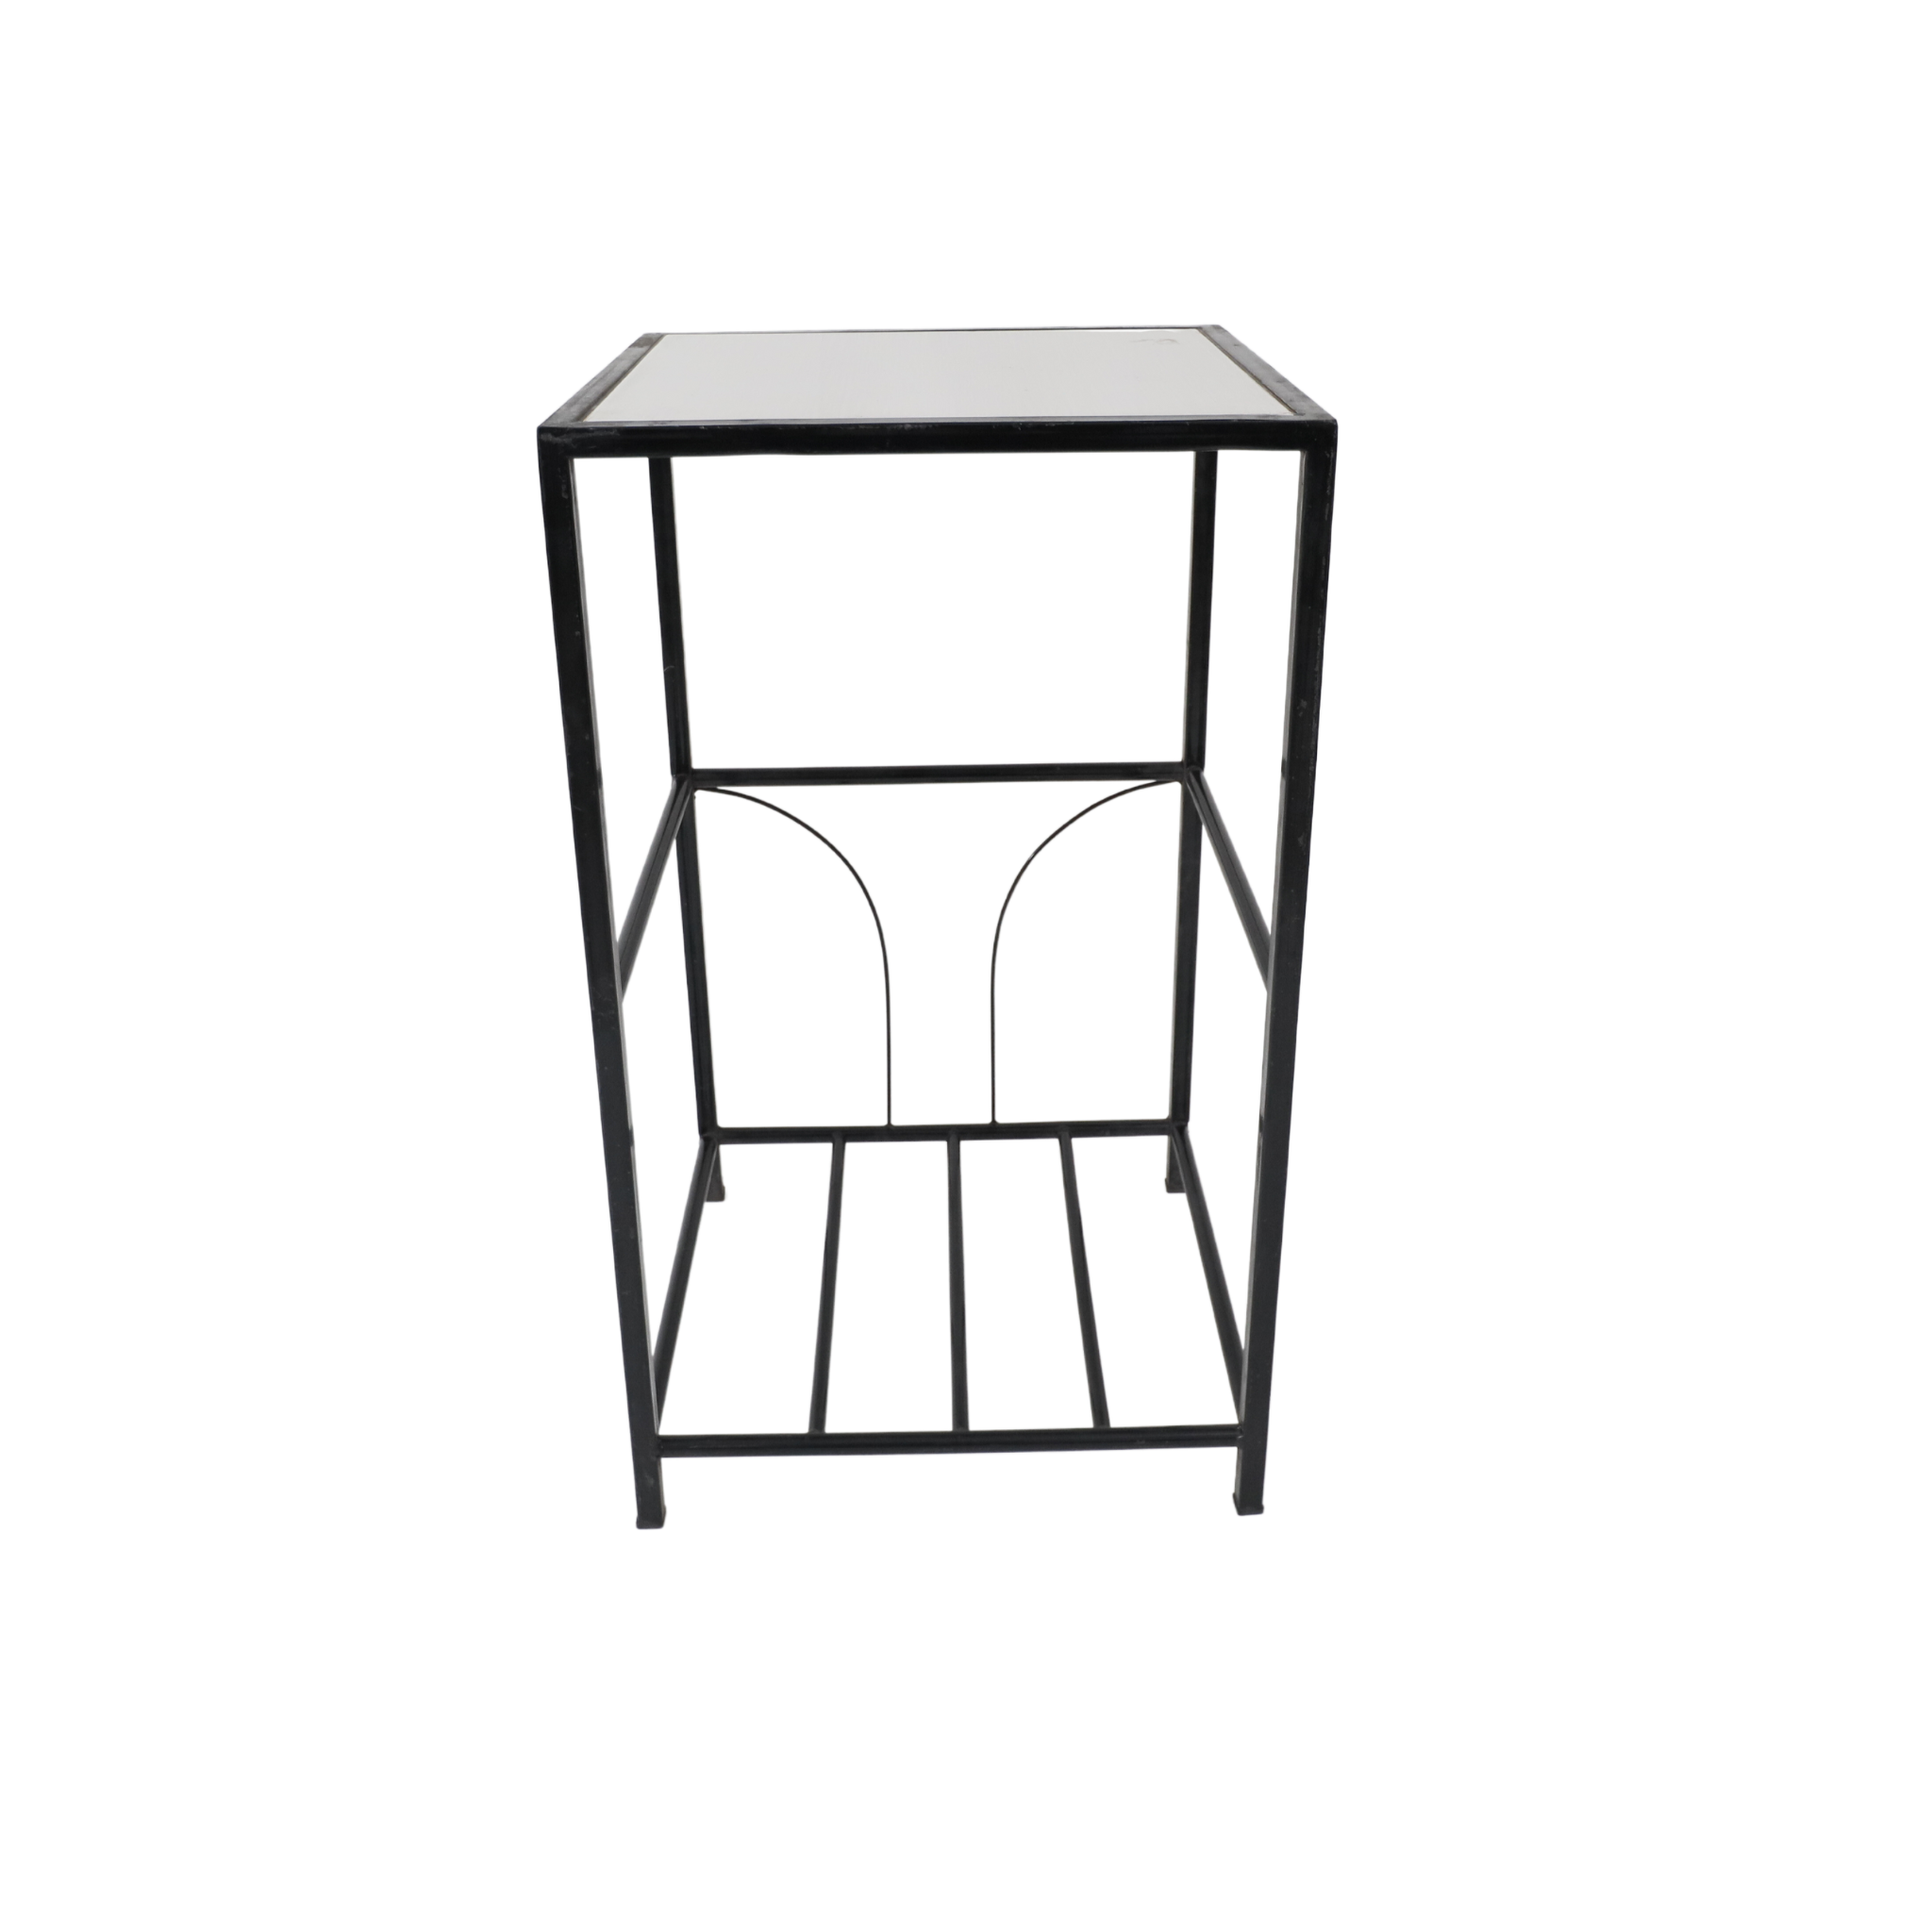 SION Single Stove Stand AF Home